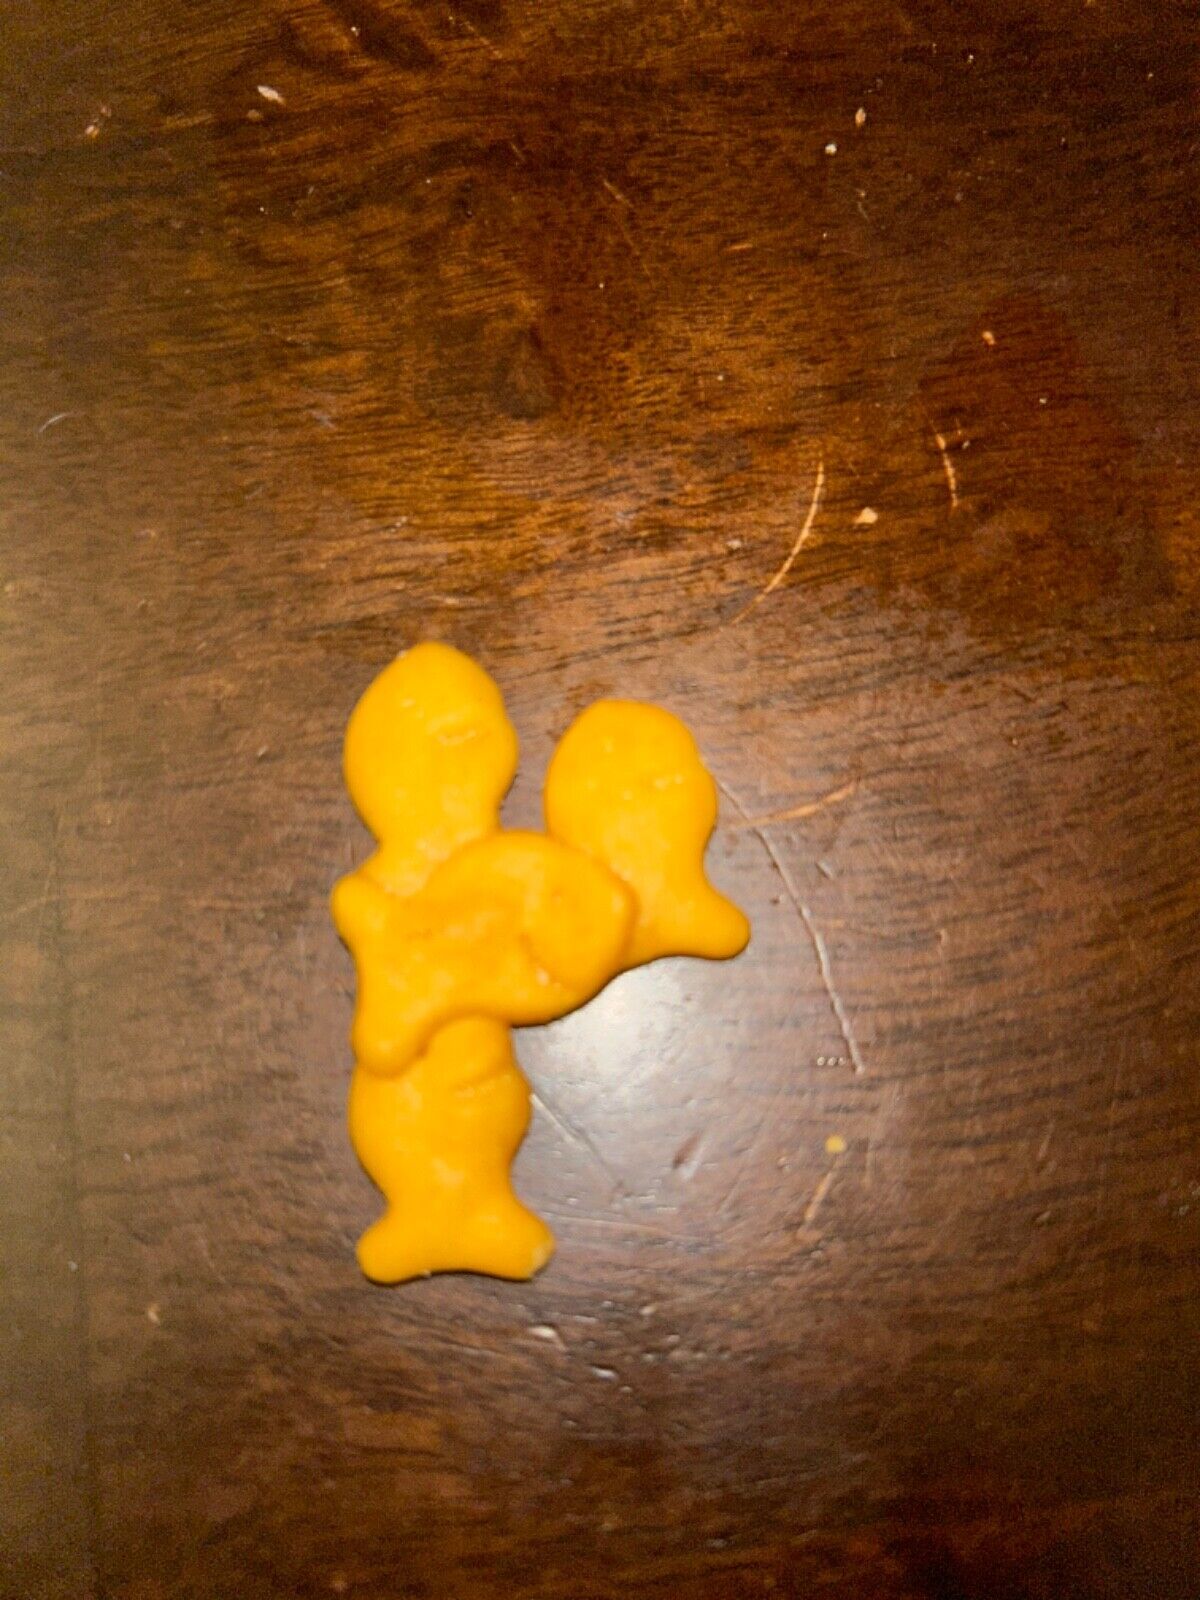 Rare 4 Goldfish Cheddar Crackers, shape of the number 4 